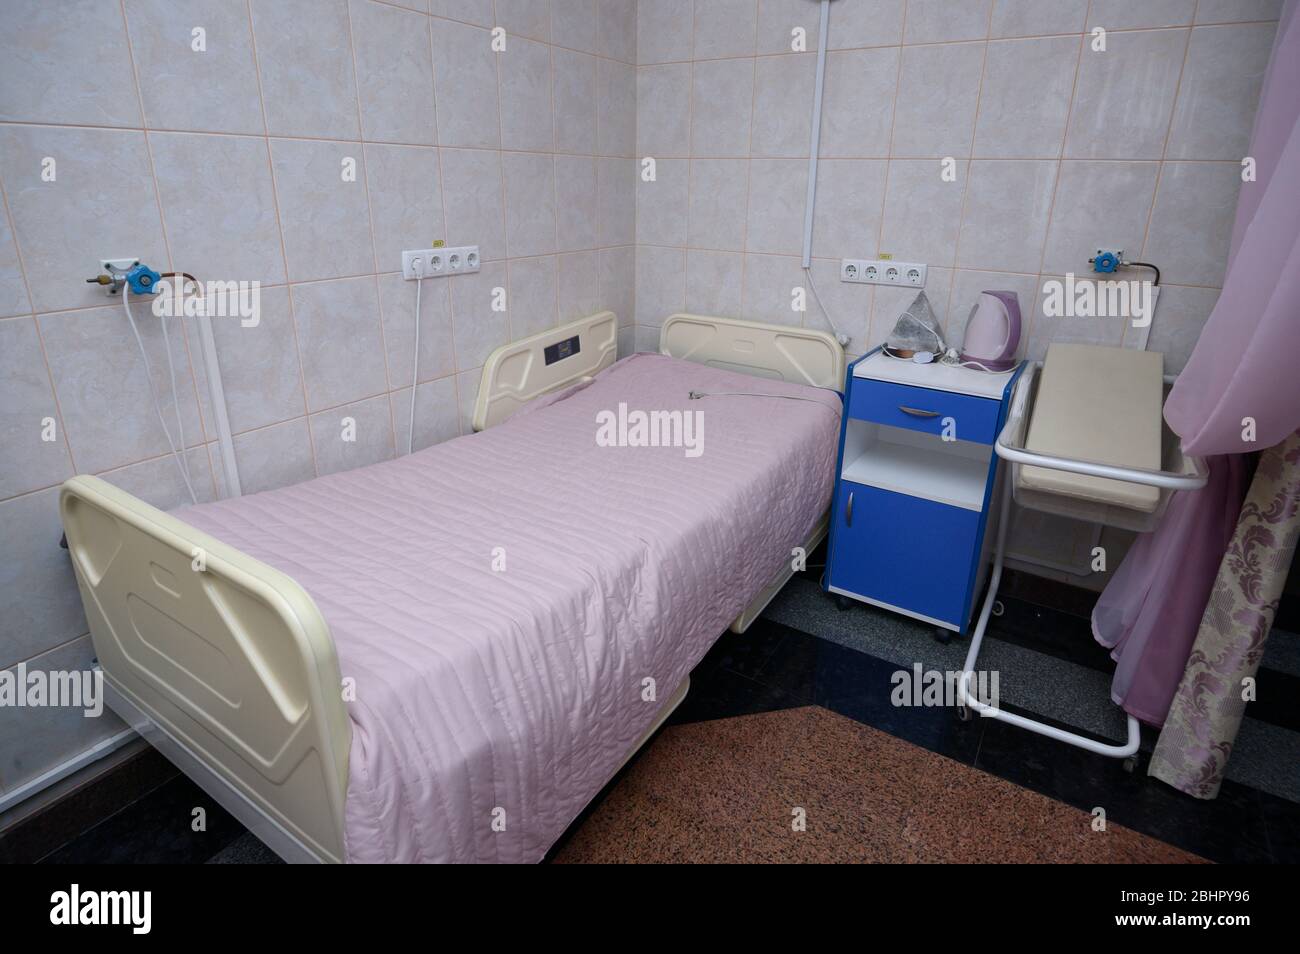 Maternity ward for delivery like at home, hospital bed, furniture at maternity hospital Stock Photo